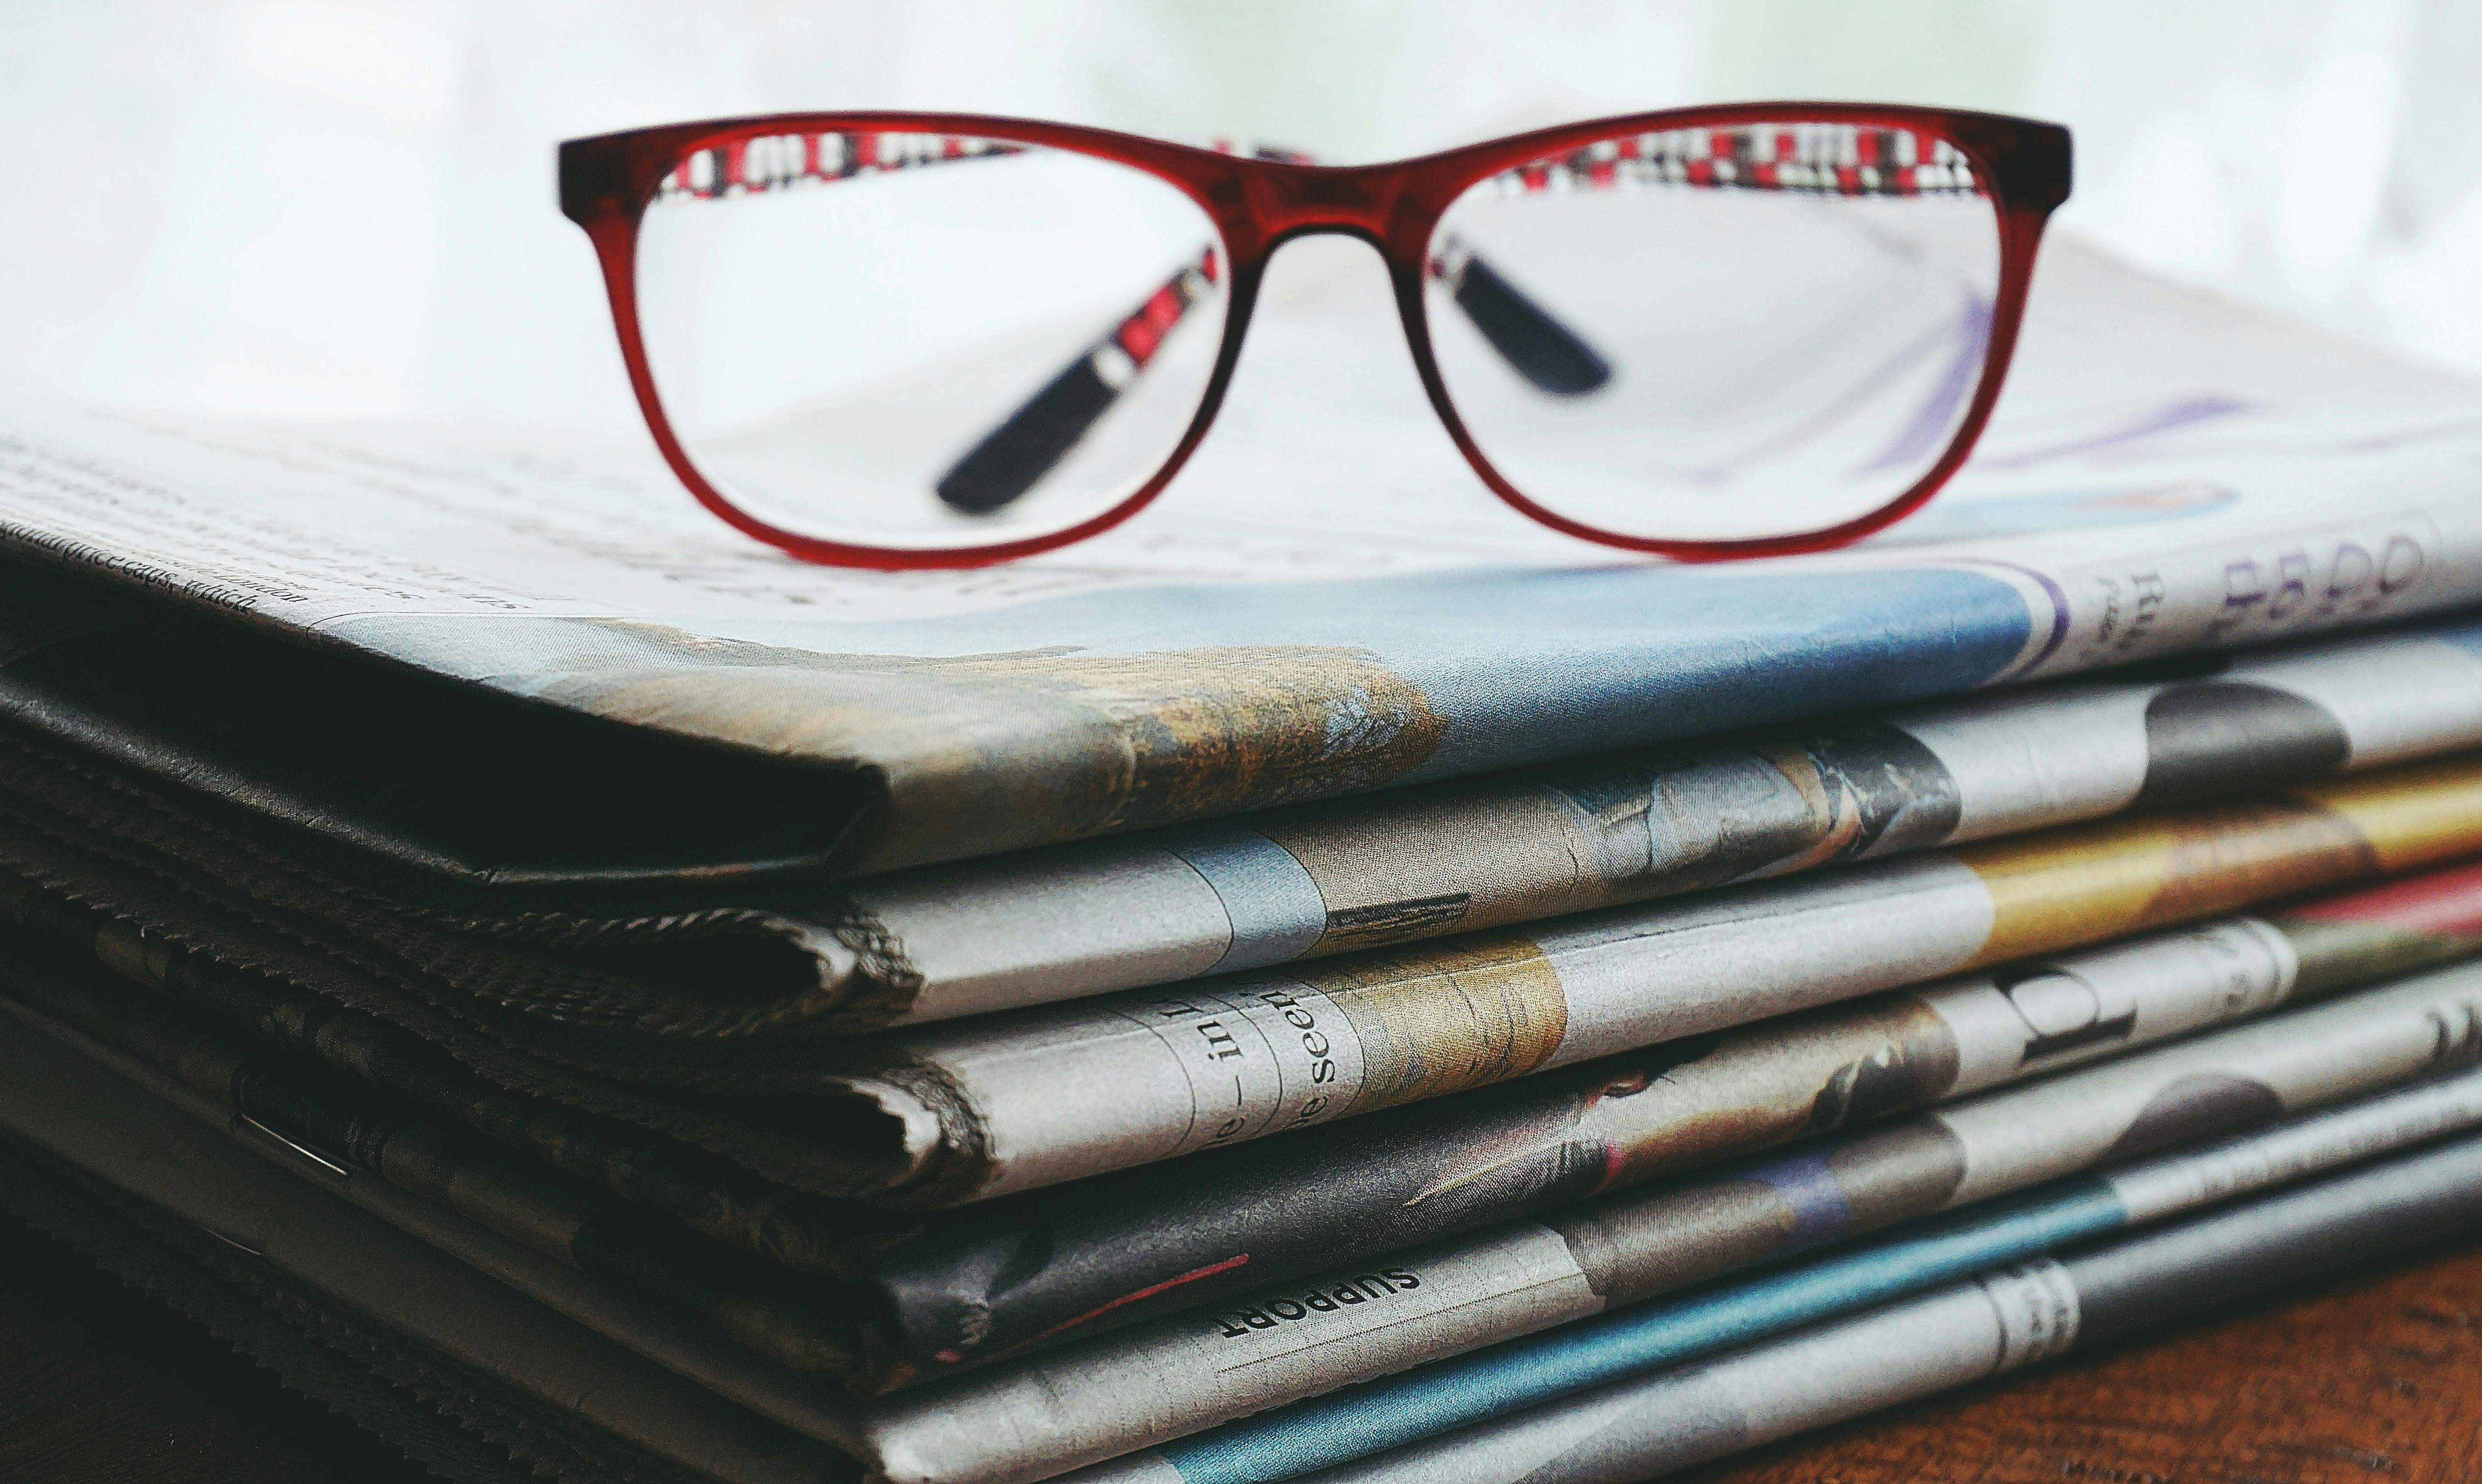 Glasses atop of stack of newspapers